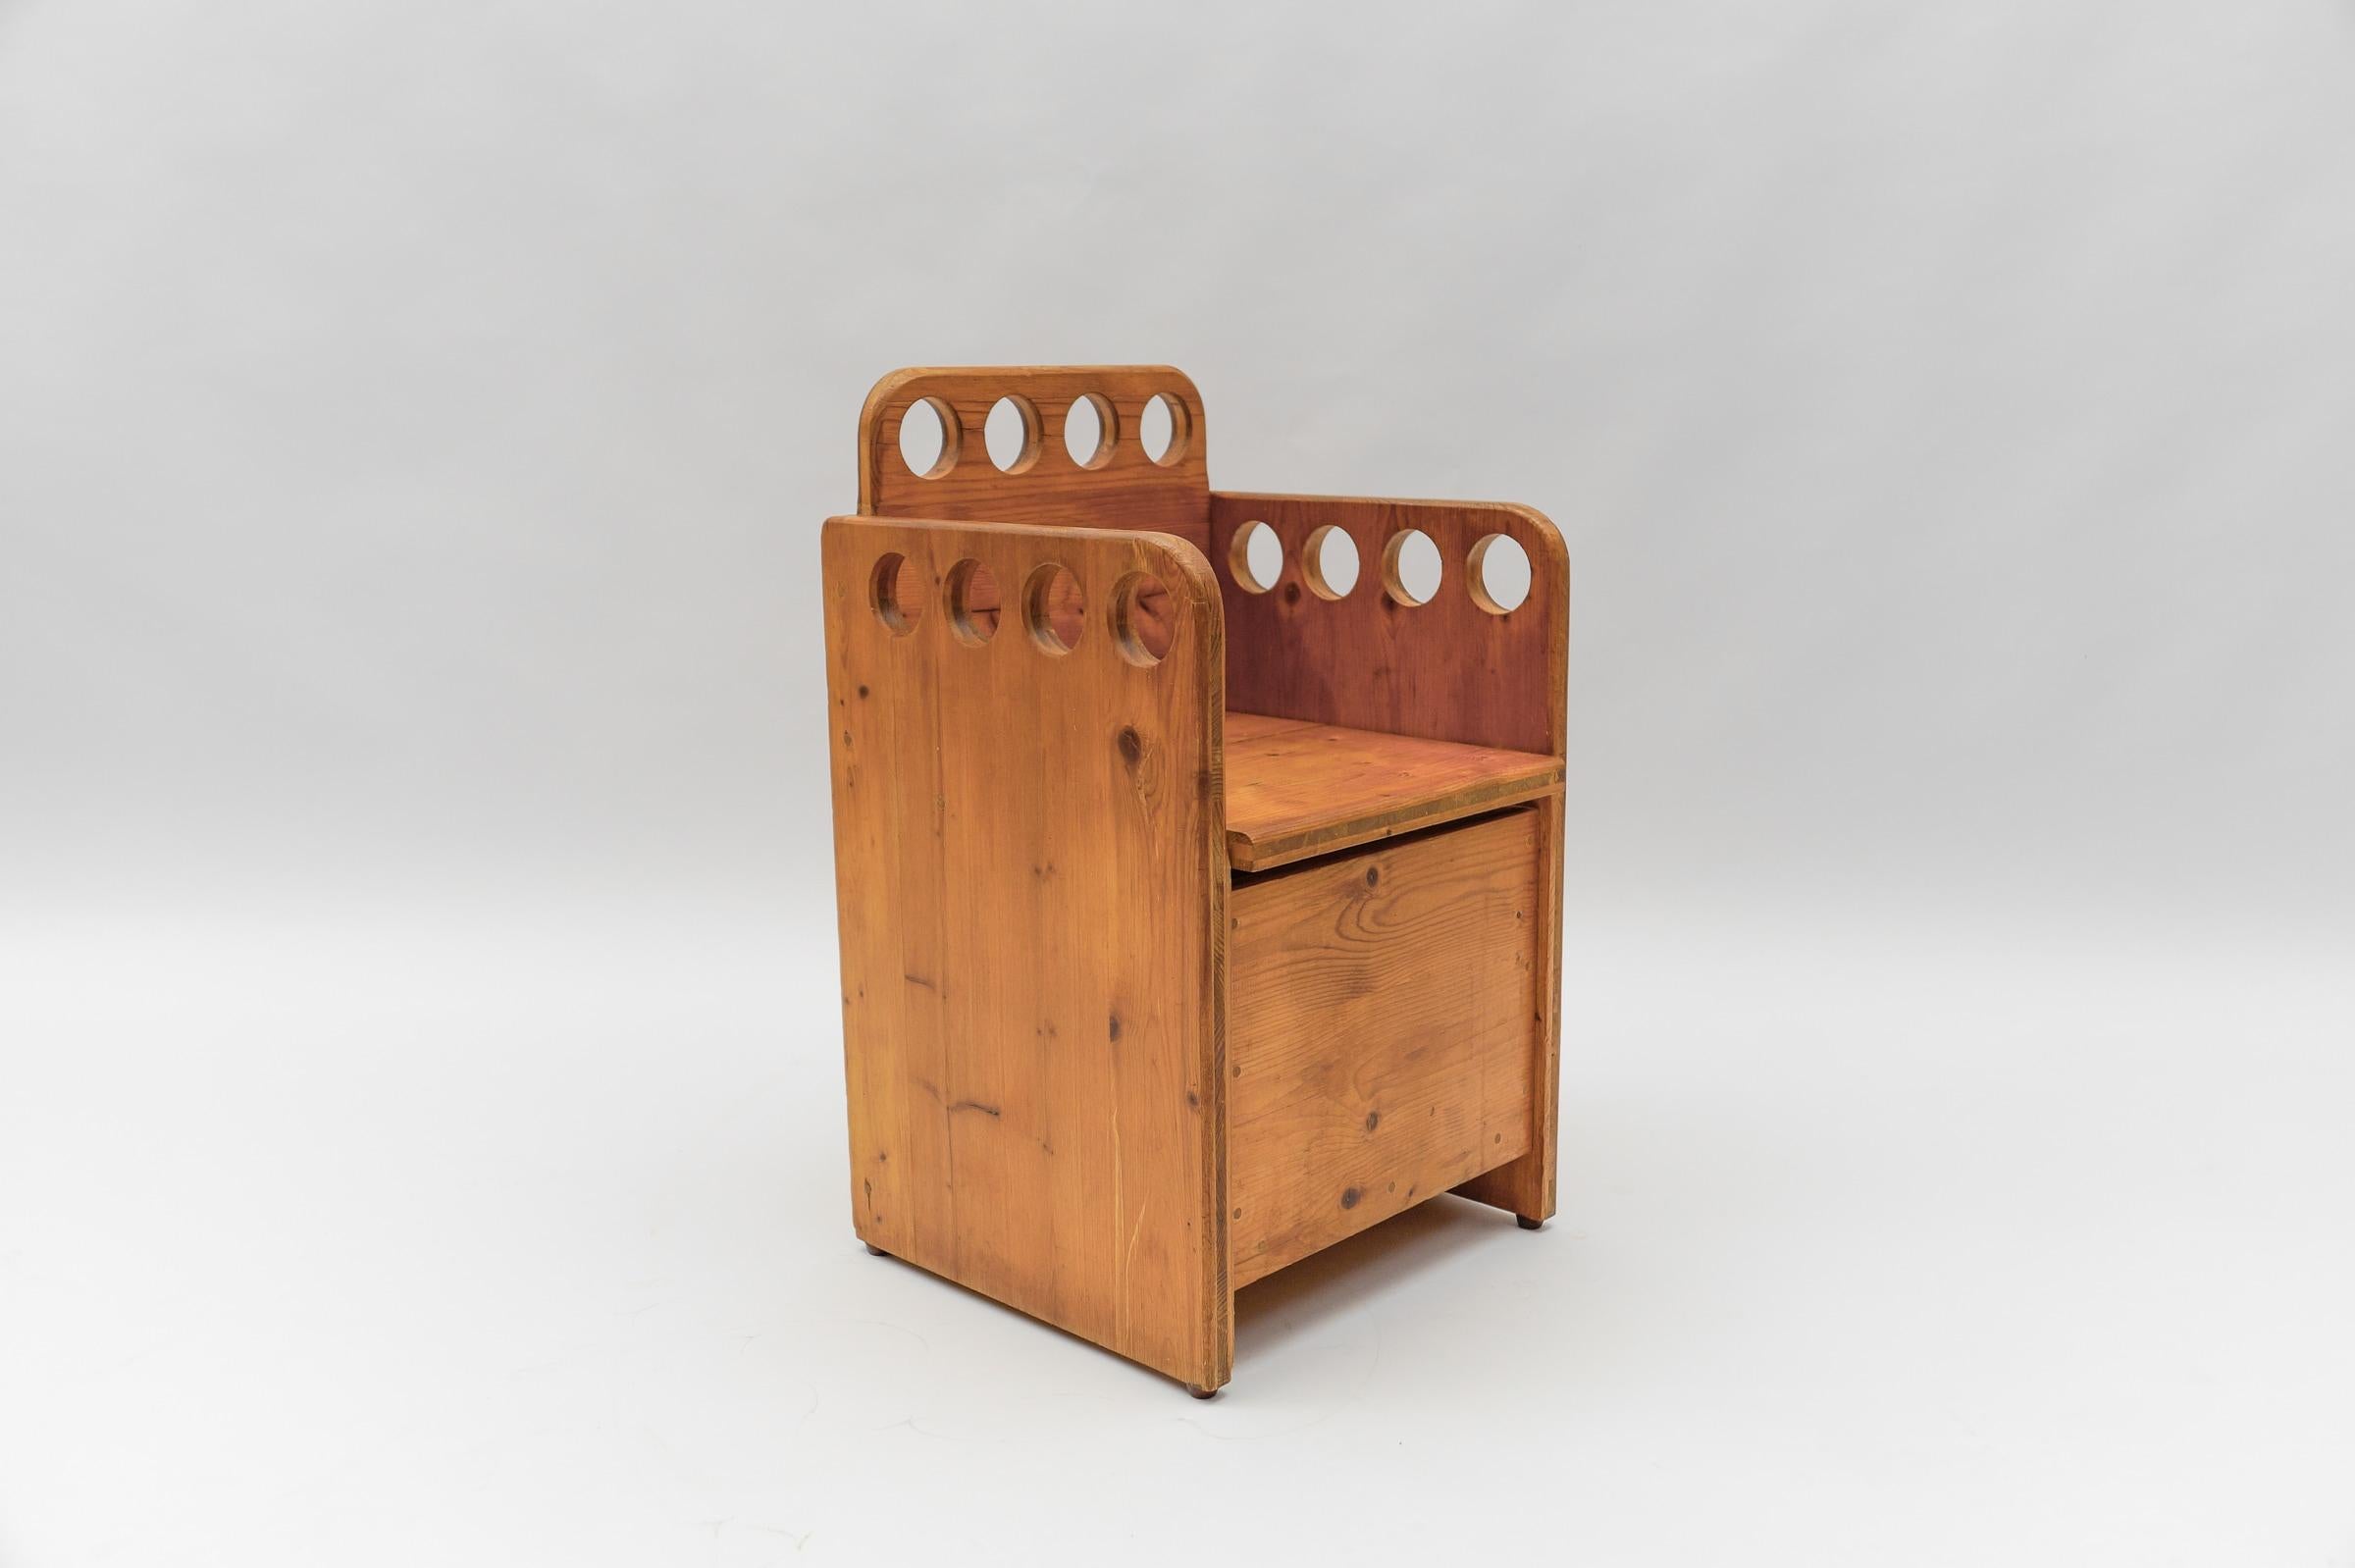 Awesome and Rare Scandinavian Pine Wood Childs Set - Chair and Bench, 1960s For Sale 1